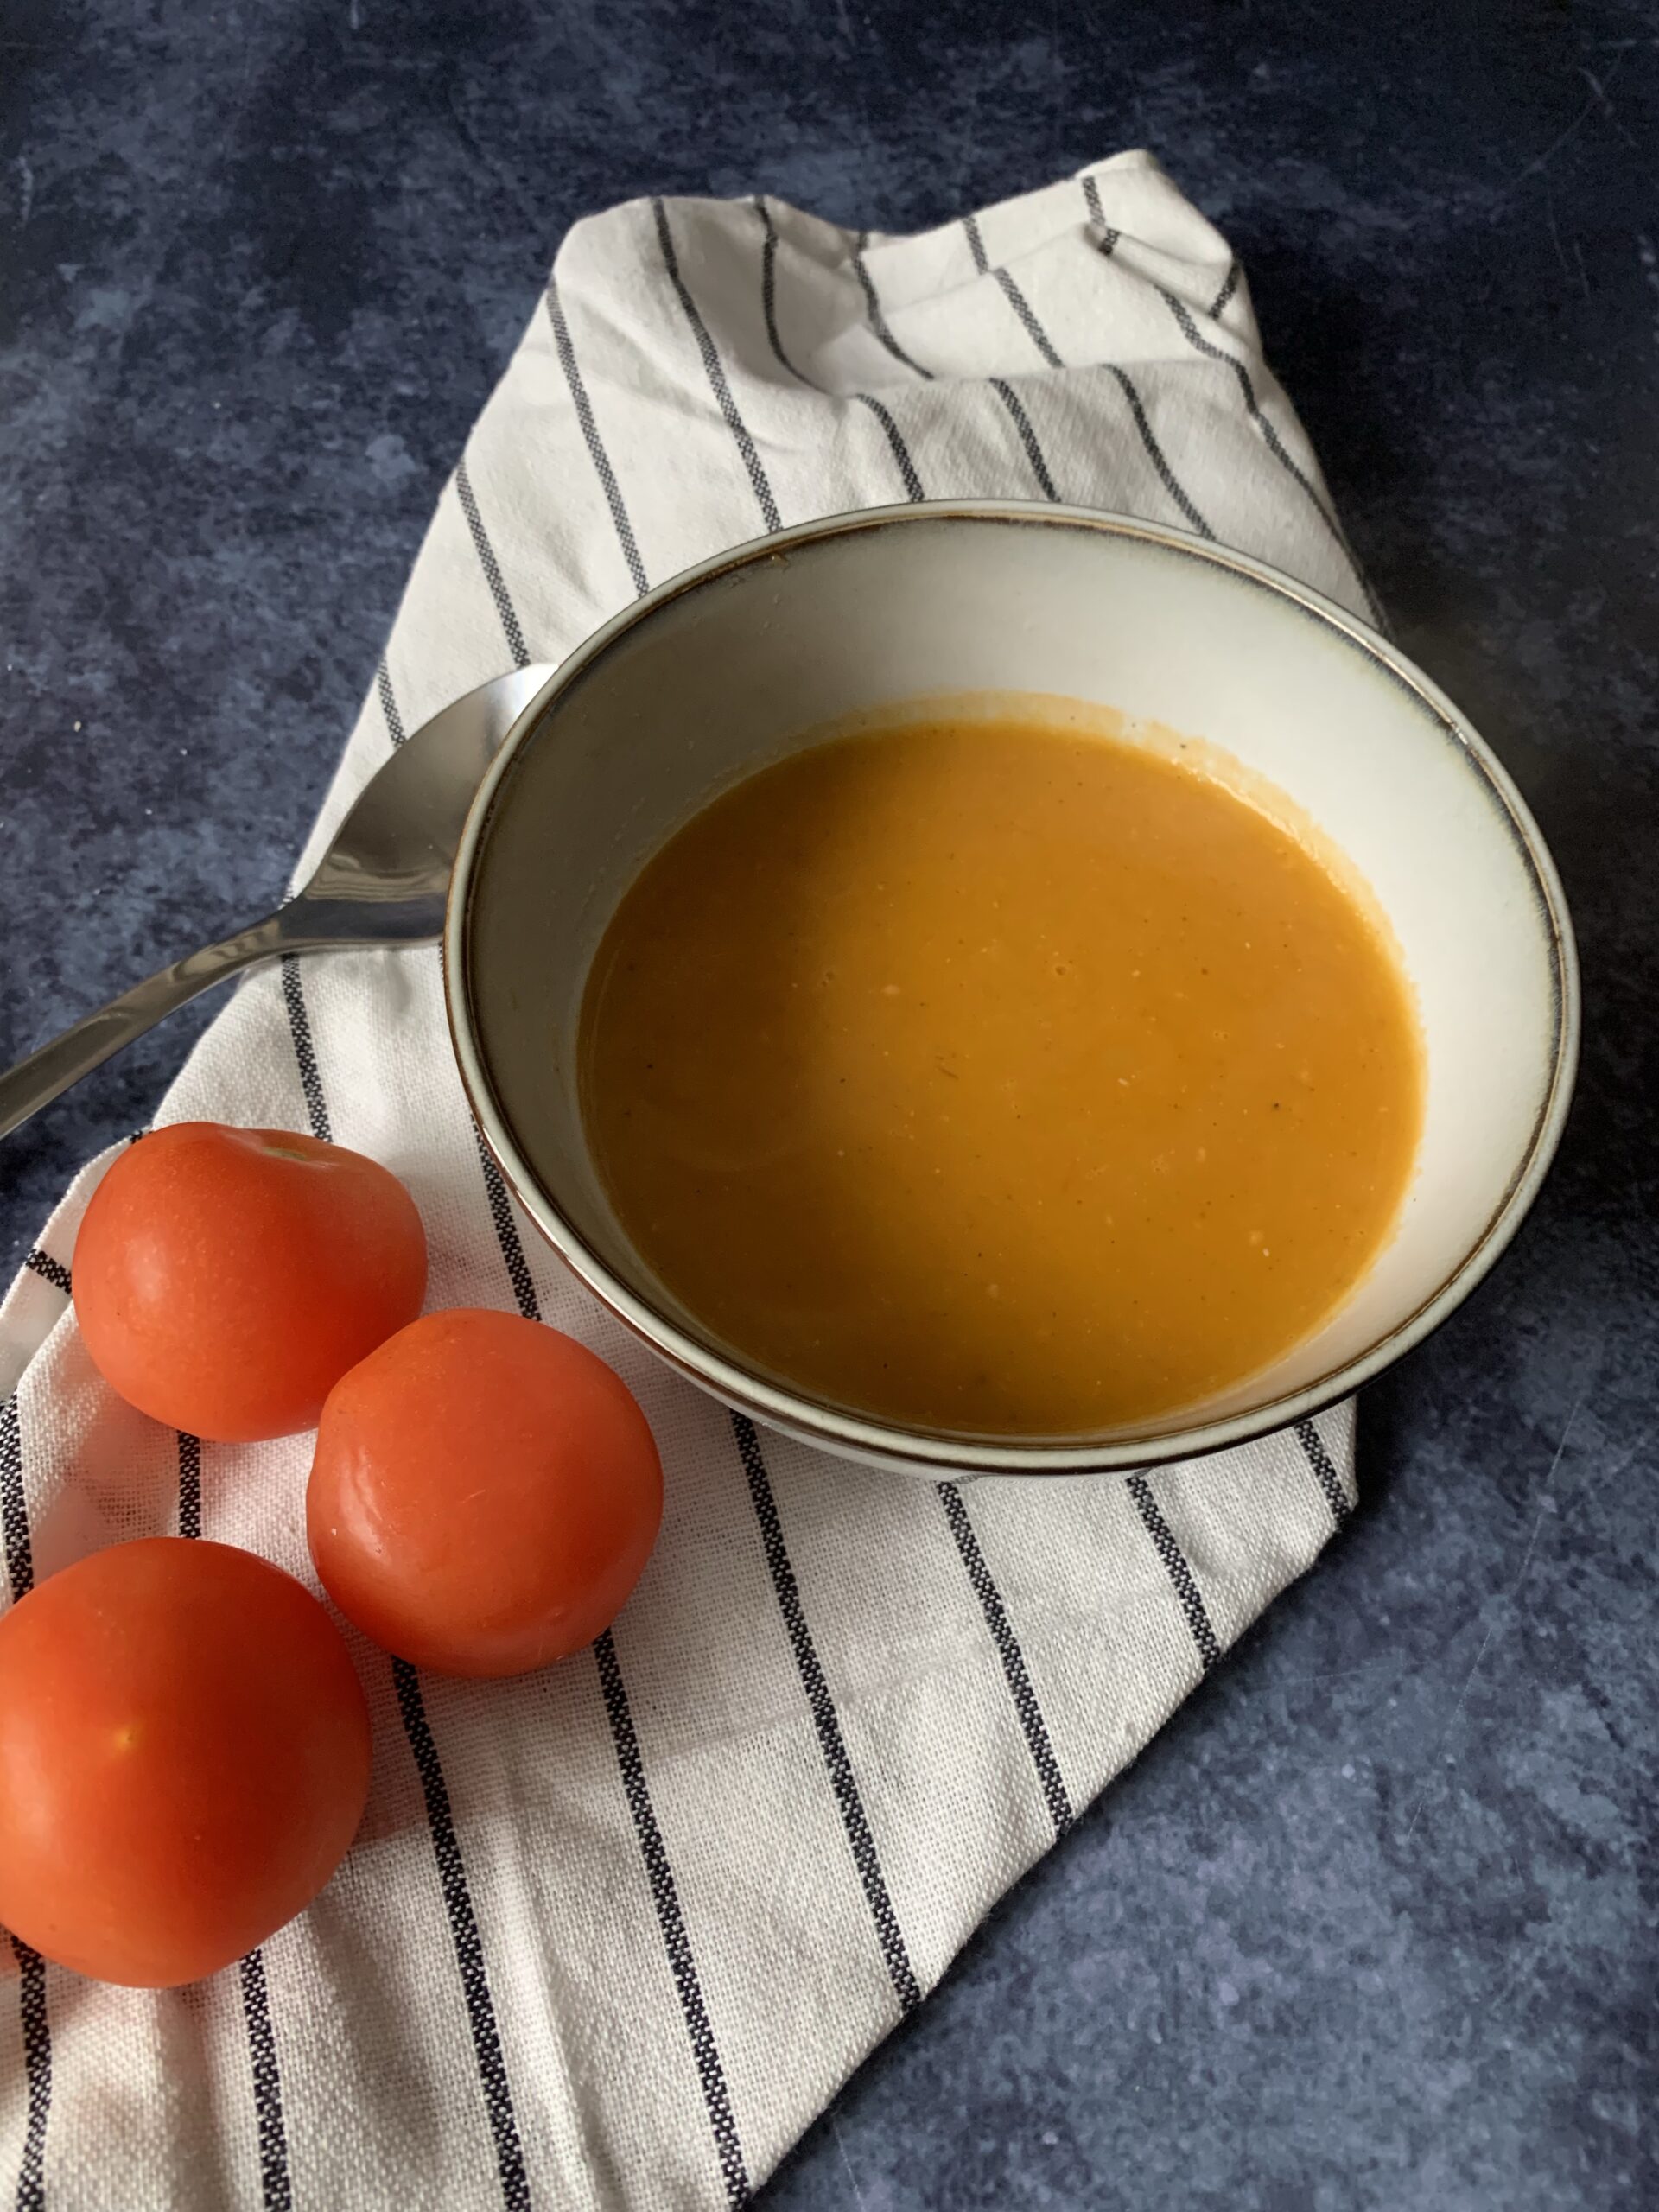 Easy homemade roasted tomato soup made in a soup maker